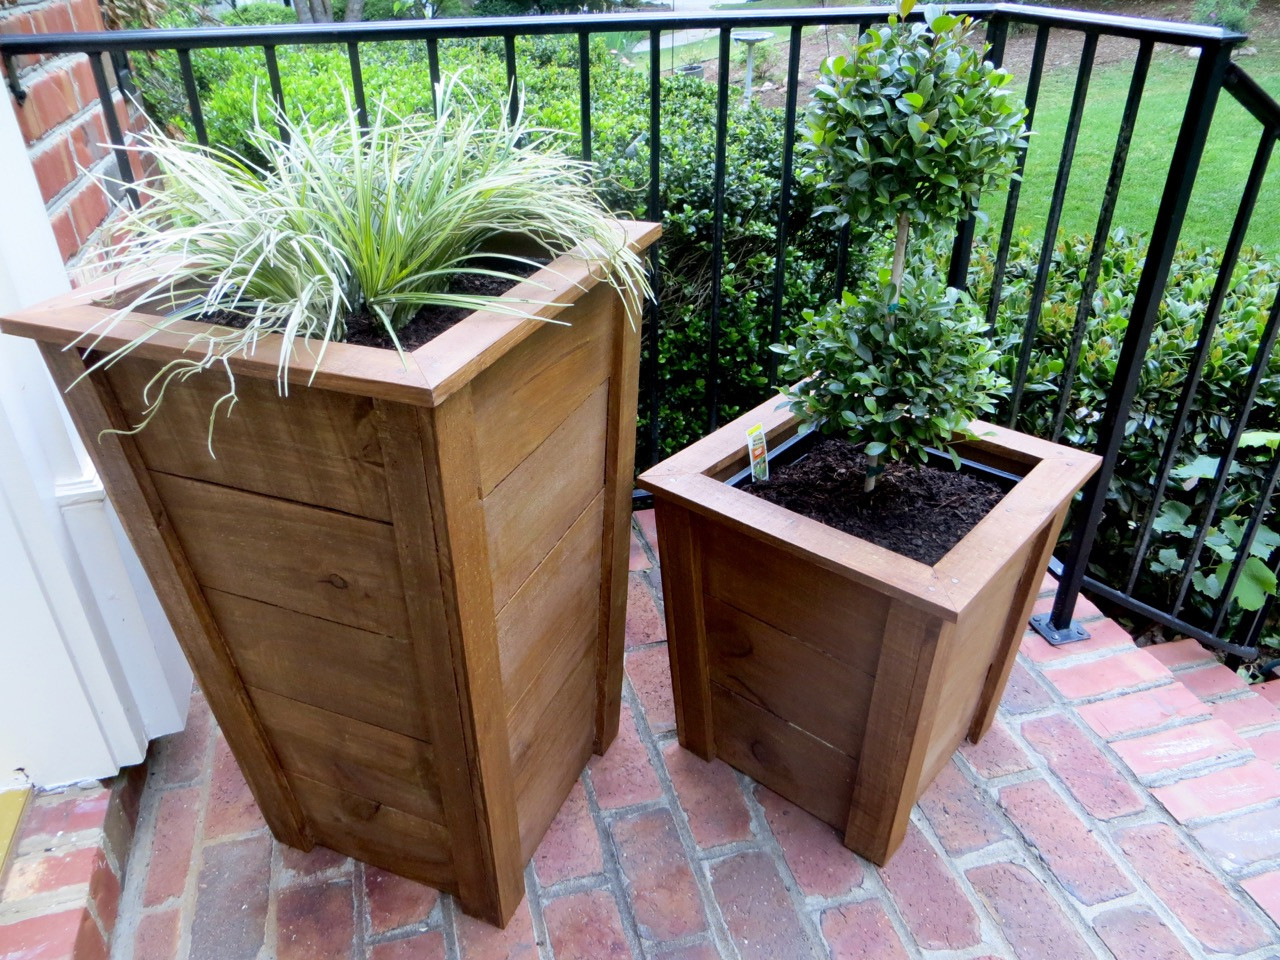 DIY Wood Flower Boxes
 The Project Lady DIY Tutorial Decorative Wood Planter Boxes